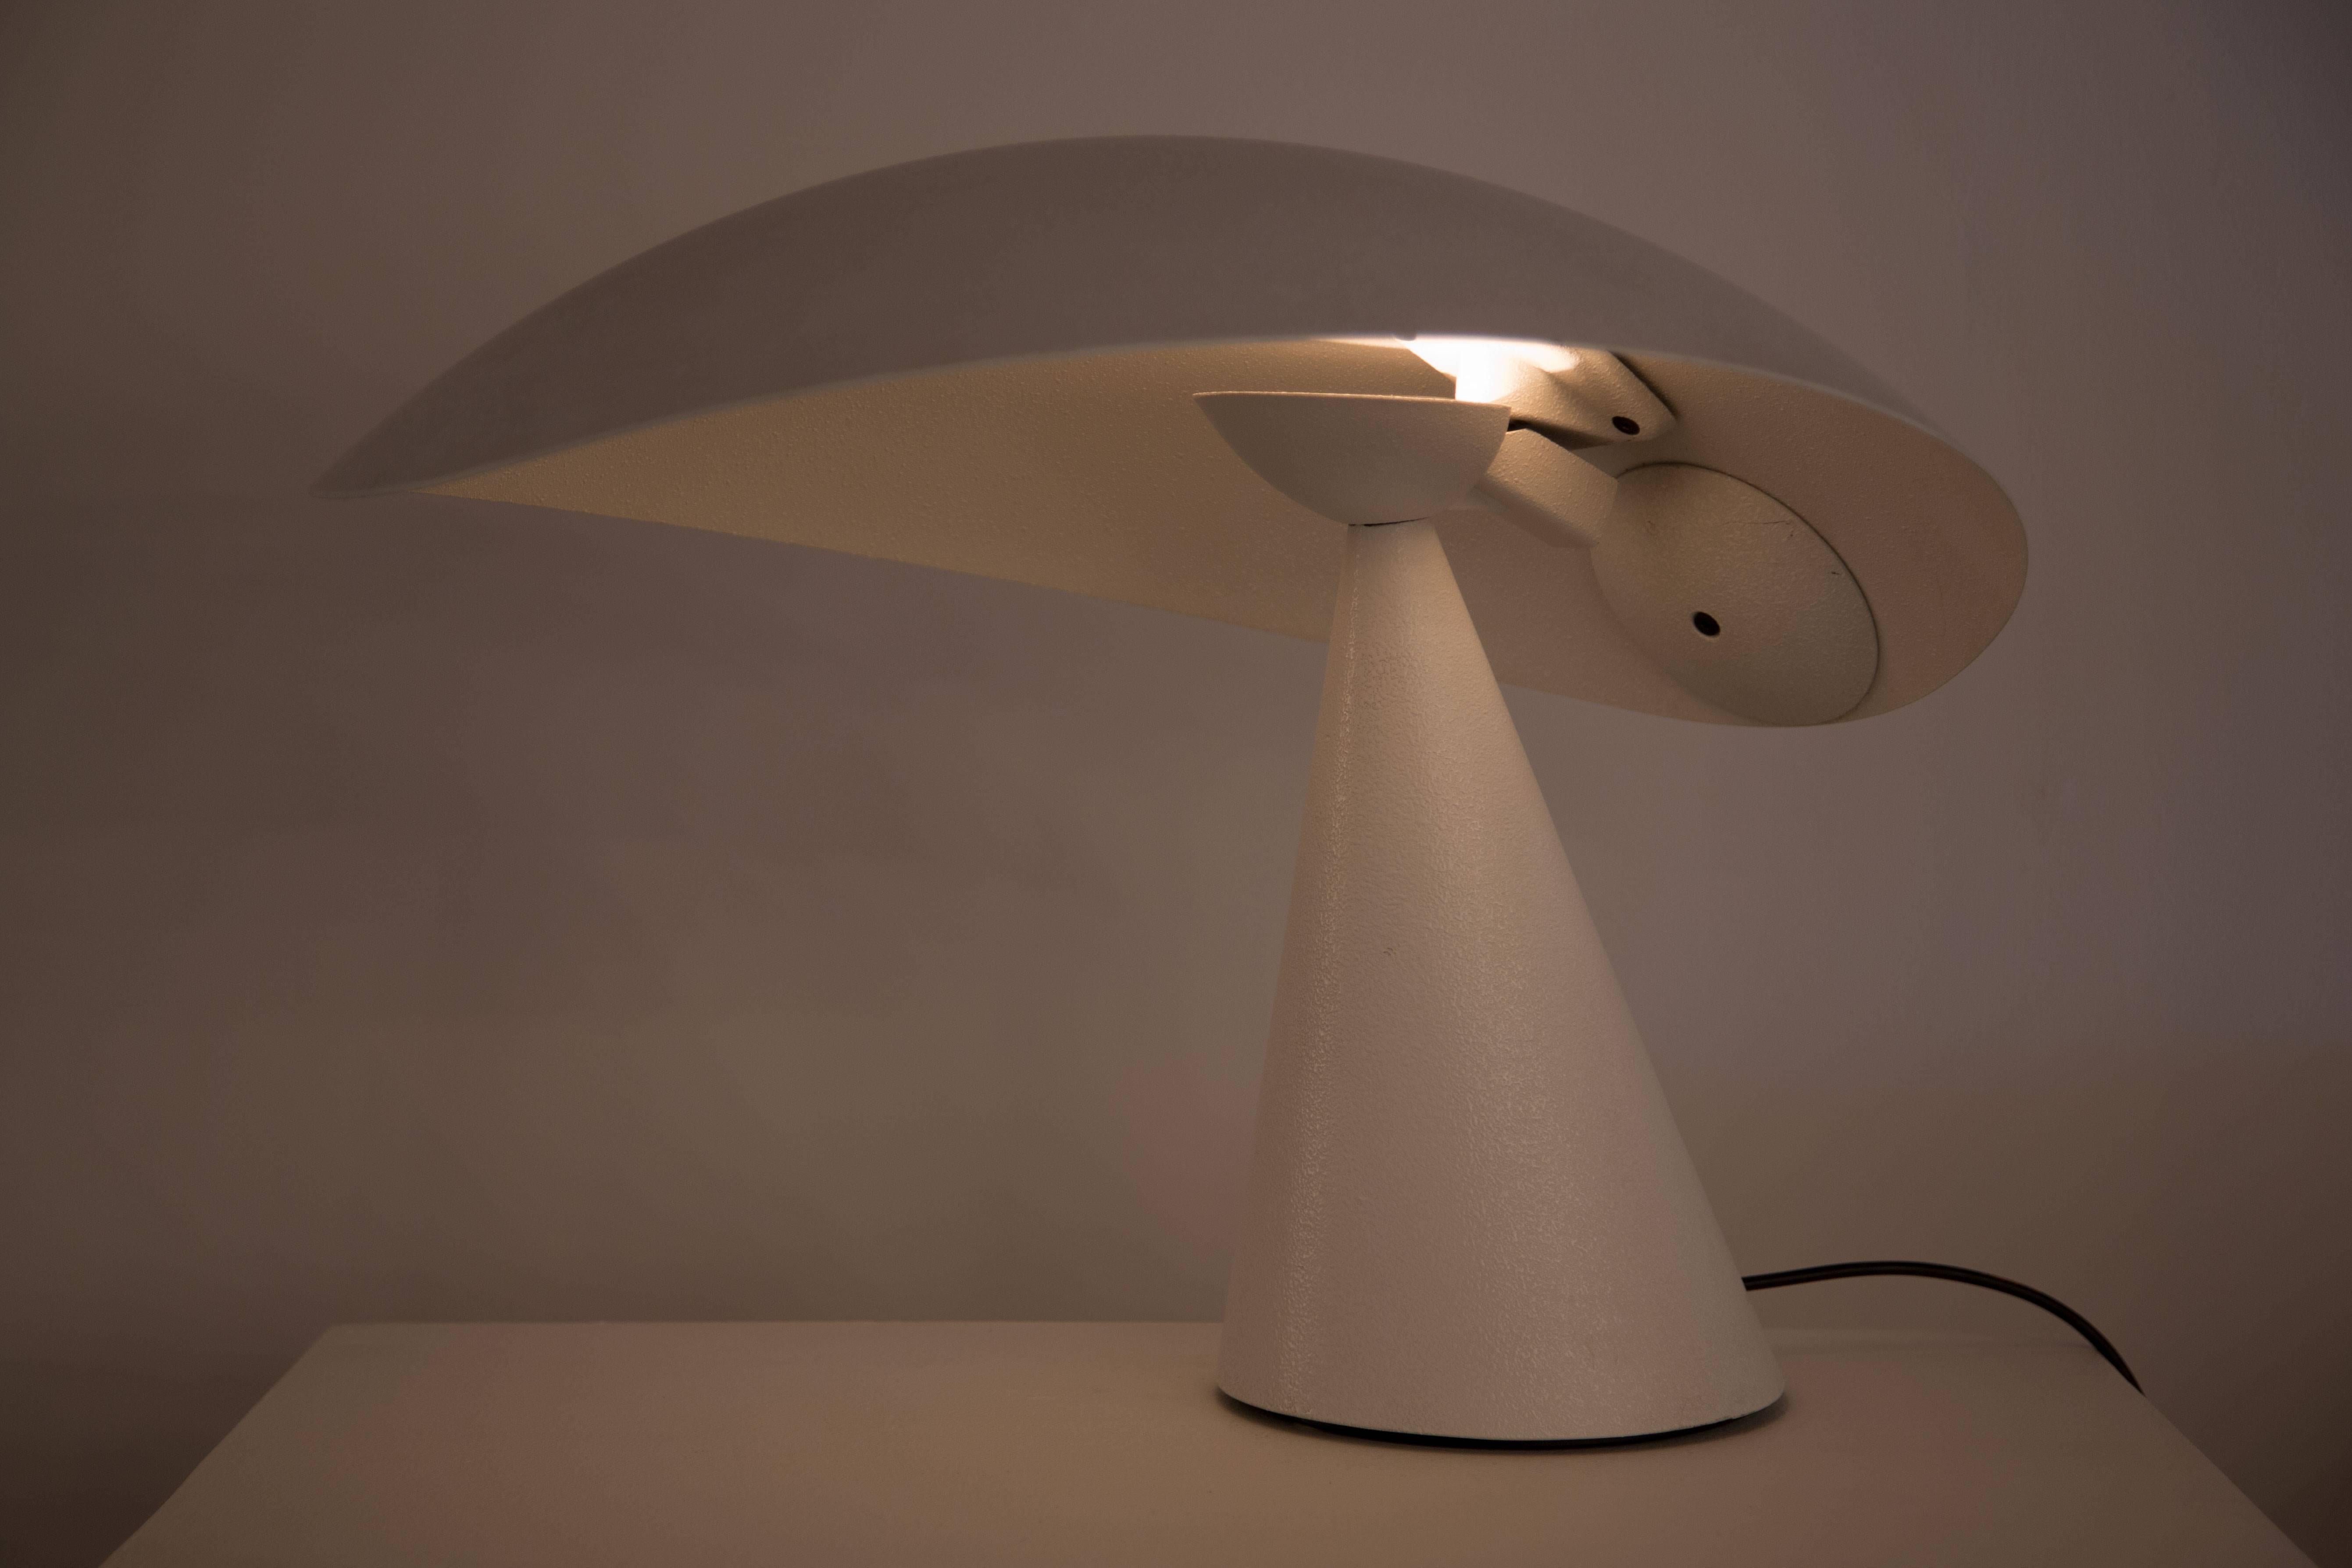 Table lamp with white enameled metal structure and large curved articulating shade retains original label. Dimmer switch with two settings.